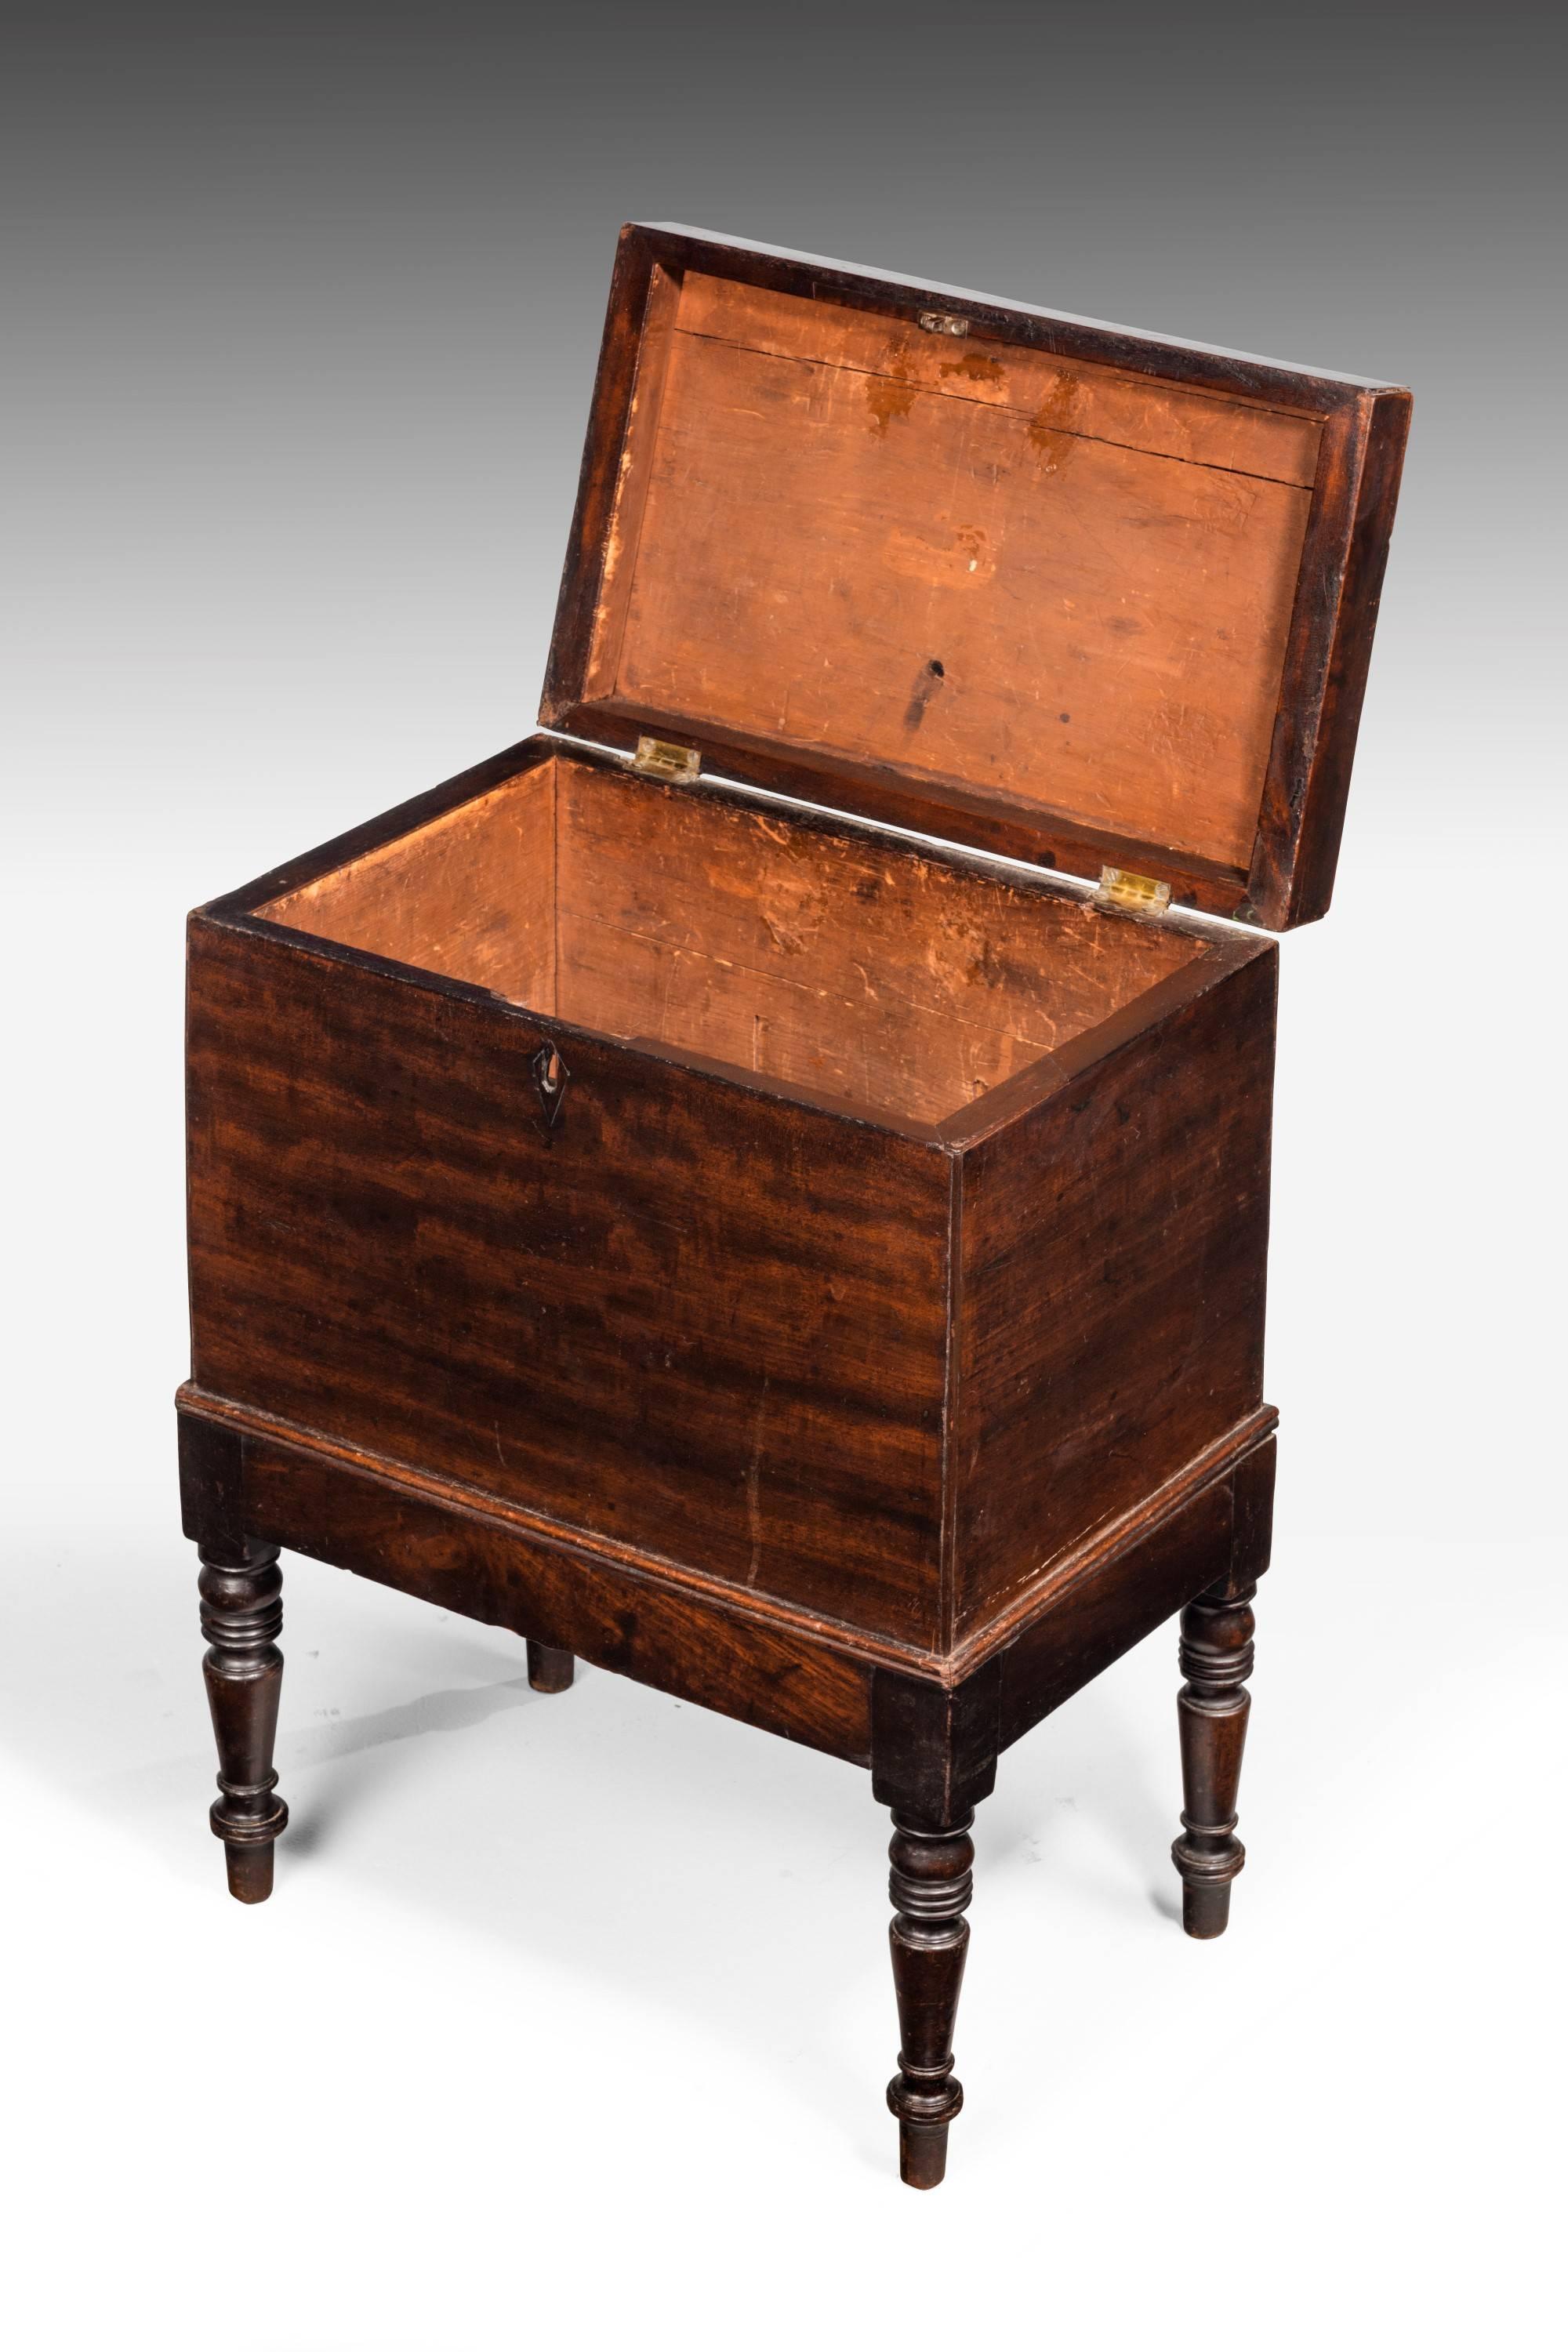 An usually small George III period mahogany cellaret. Raised on short turned supports. Good original overall color. The fitted interior now missing.